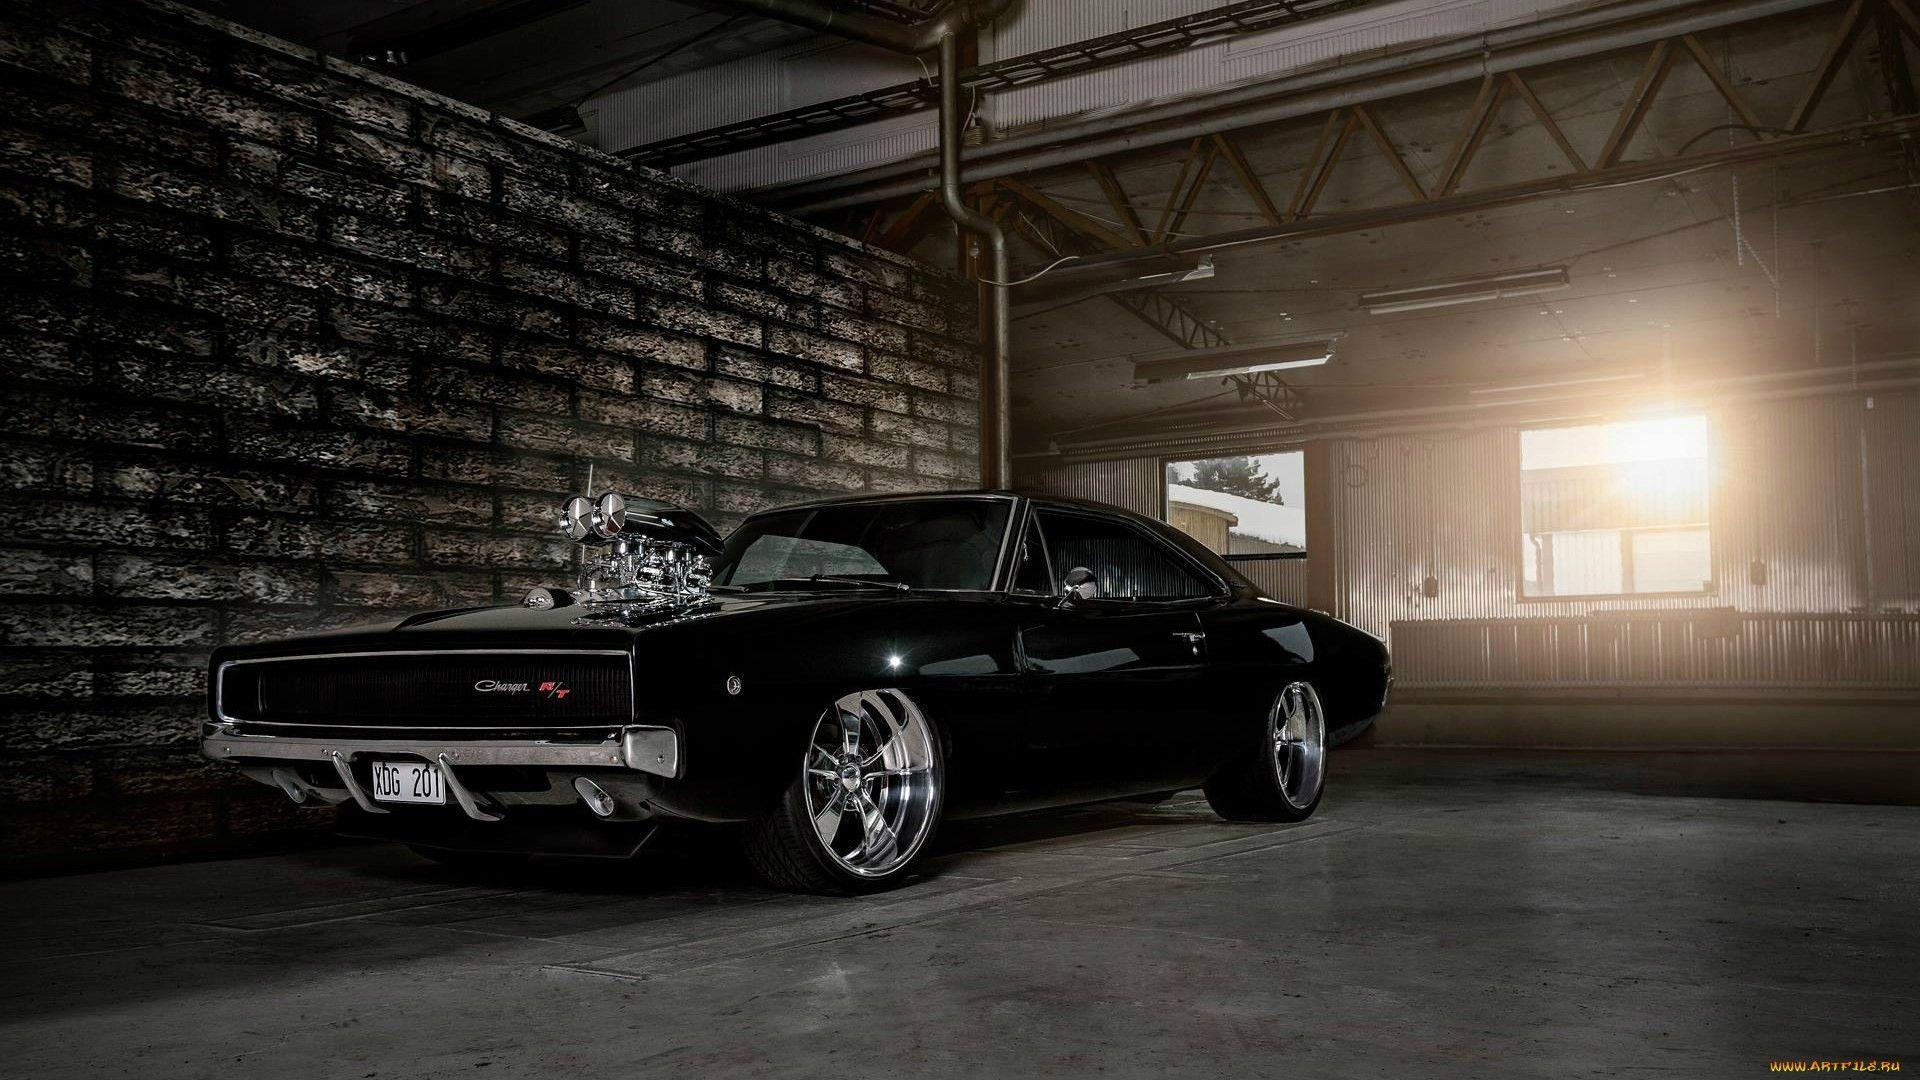 Dodge Charger Wallpaper Free 1970 Dodge Charger Background